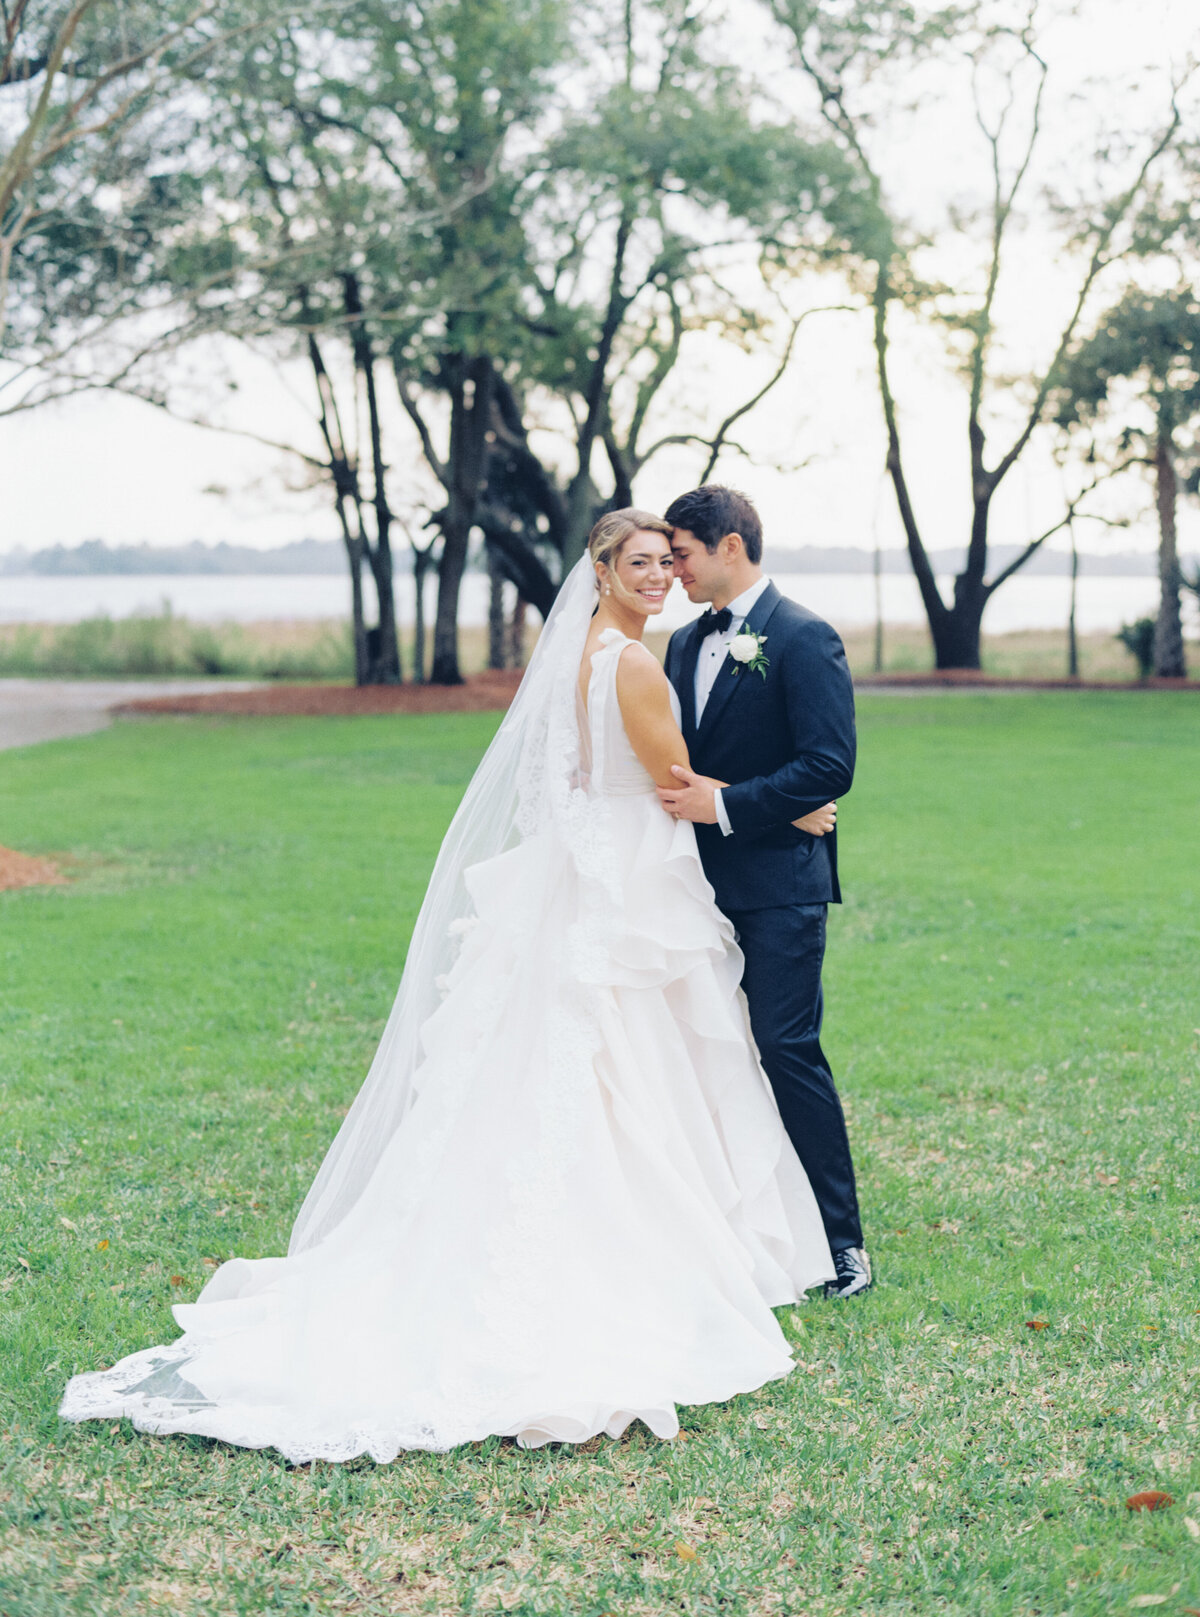 Bride and groom portrait at Lowndes Grove. Destination film photographer. Kailee DiMeglio Photography.